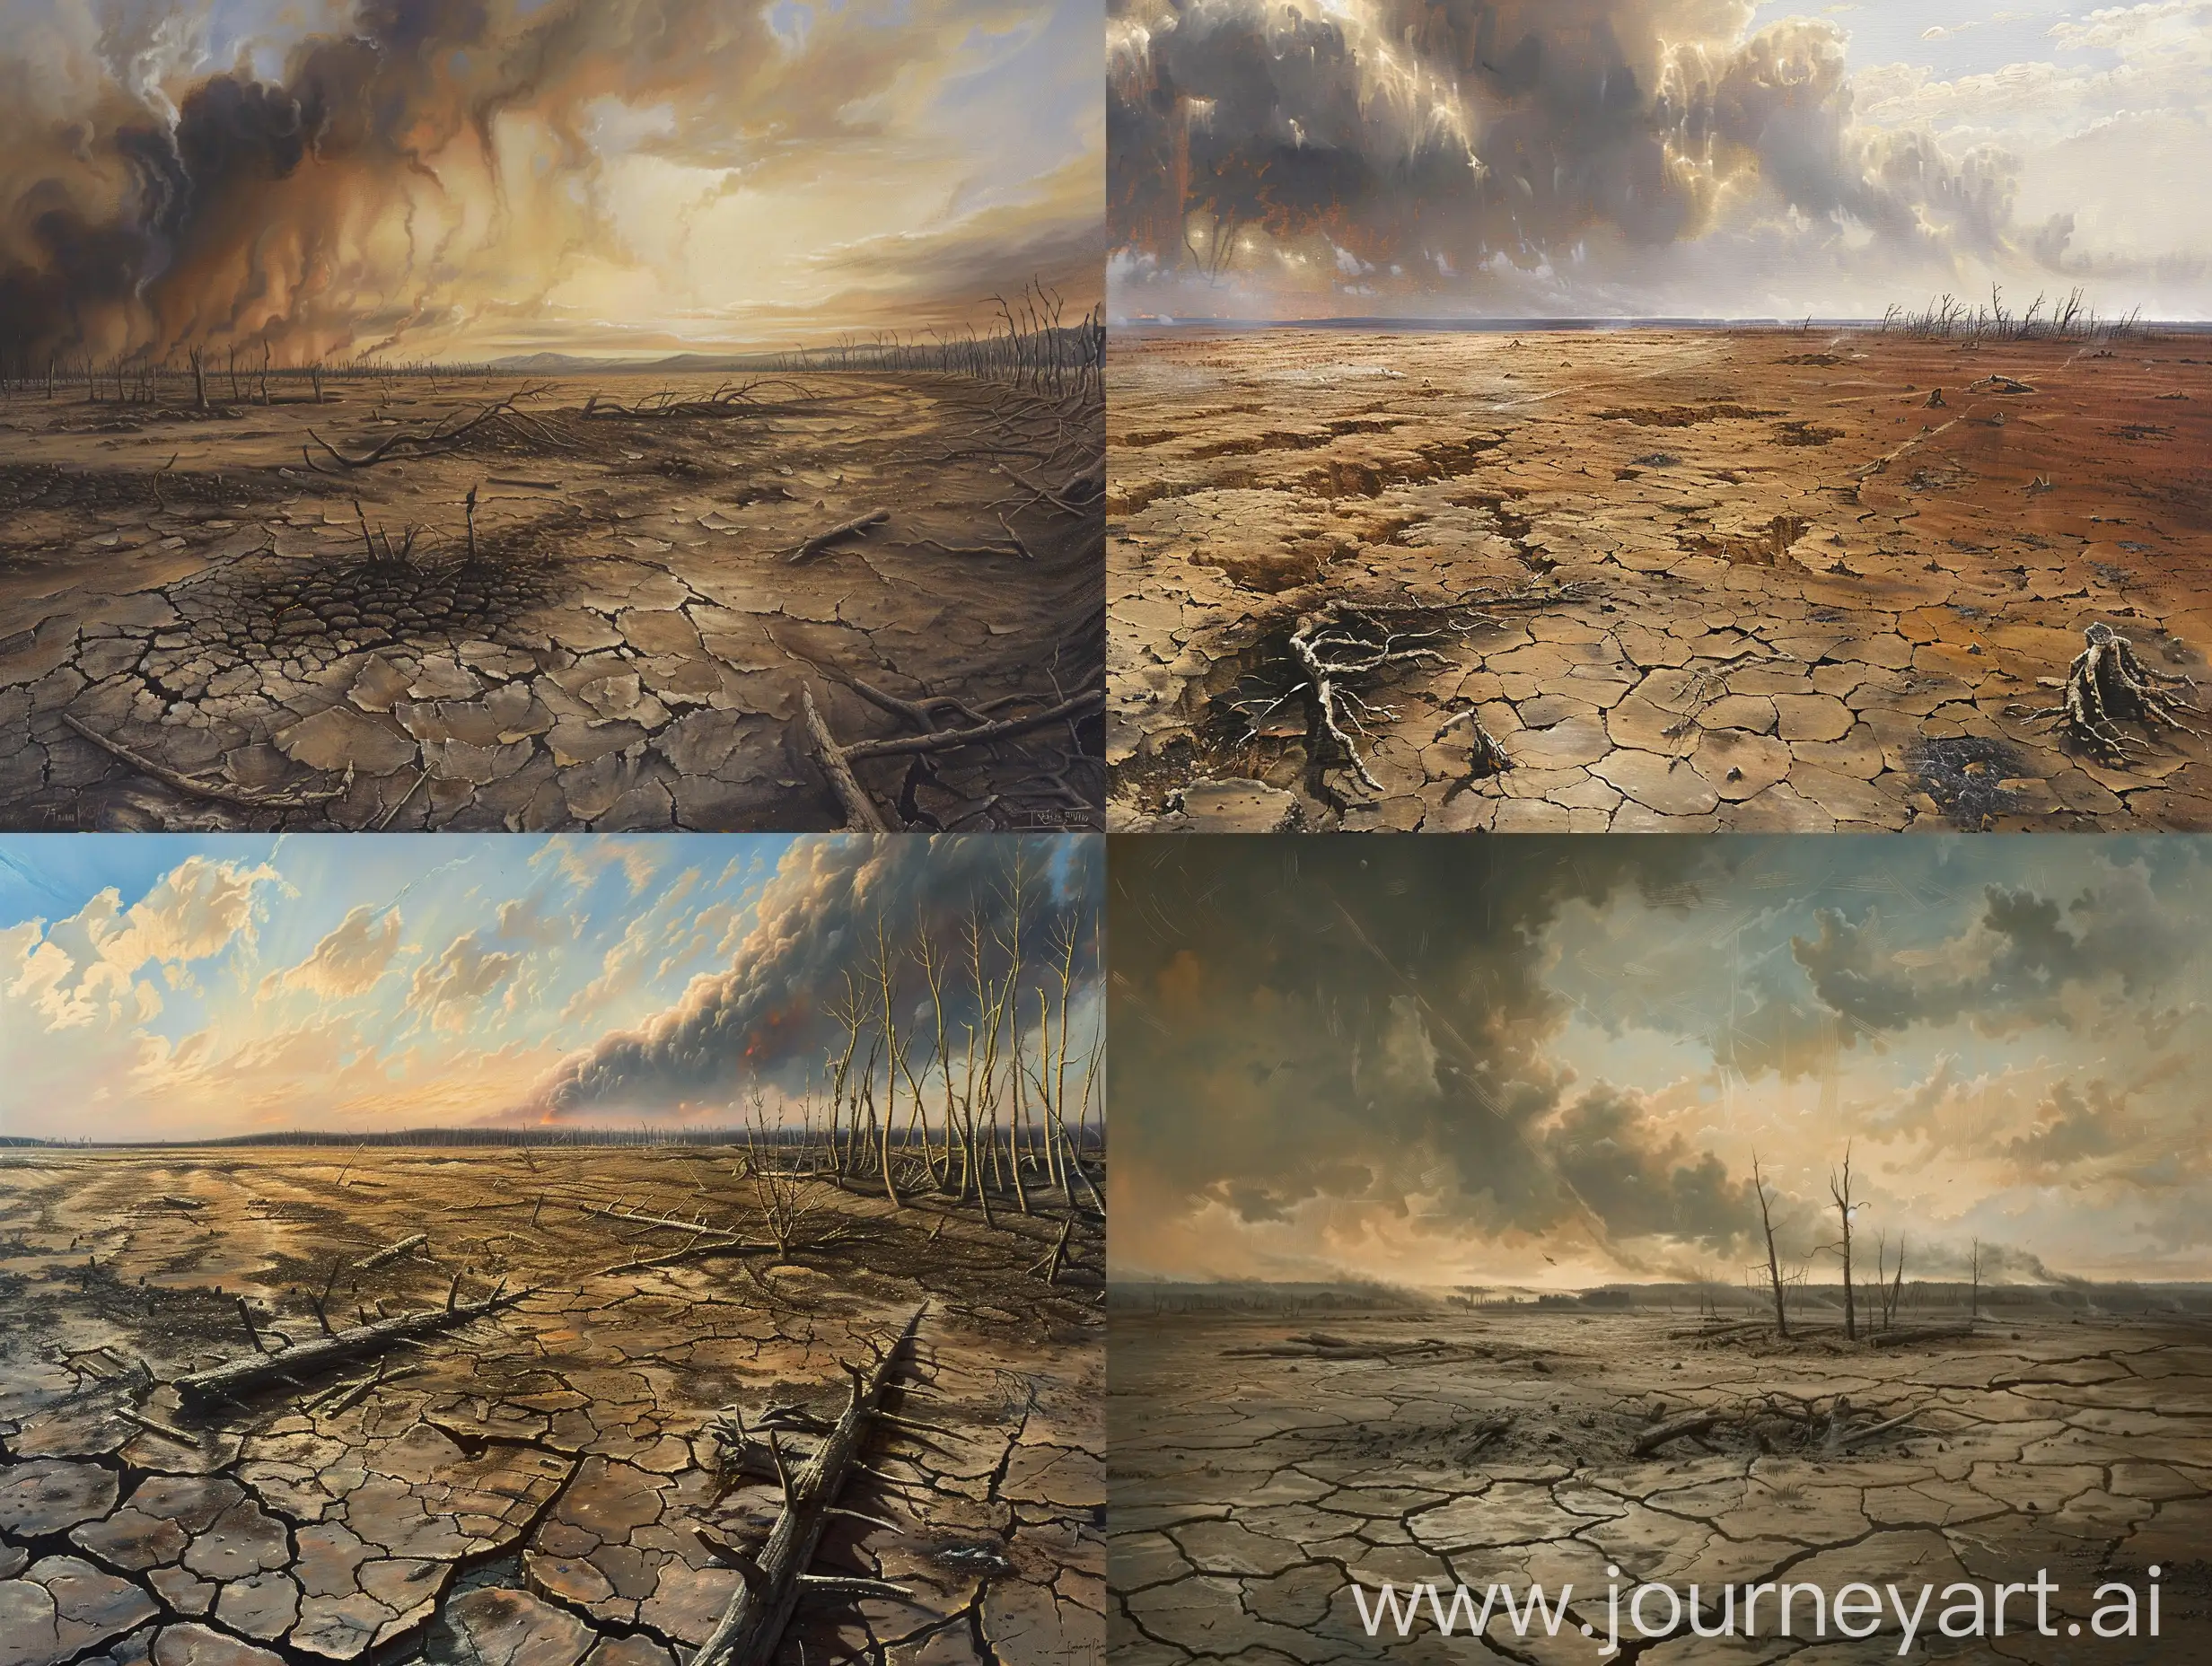 Realistic-Painting-of-a-Barren-Landscape-with-Cracked-Earth-and-Charred-Trees